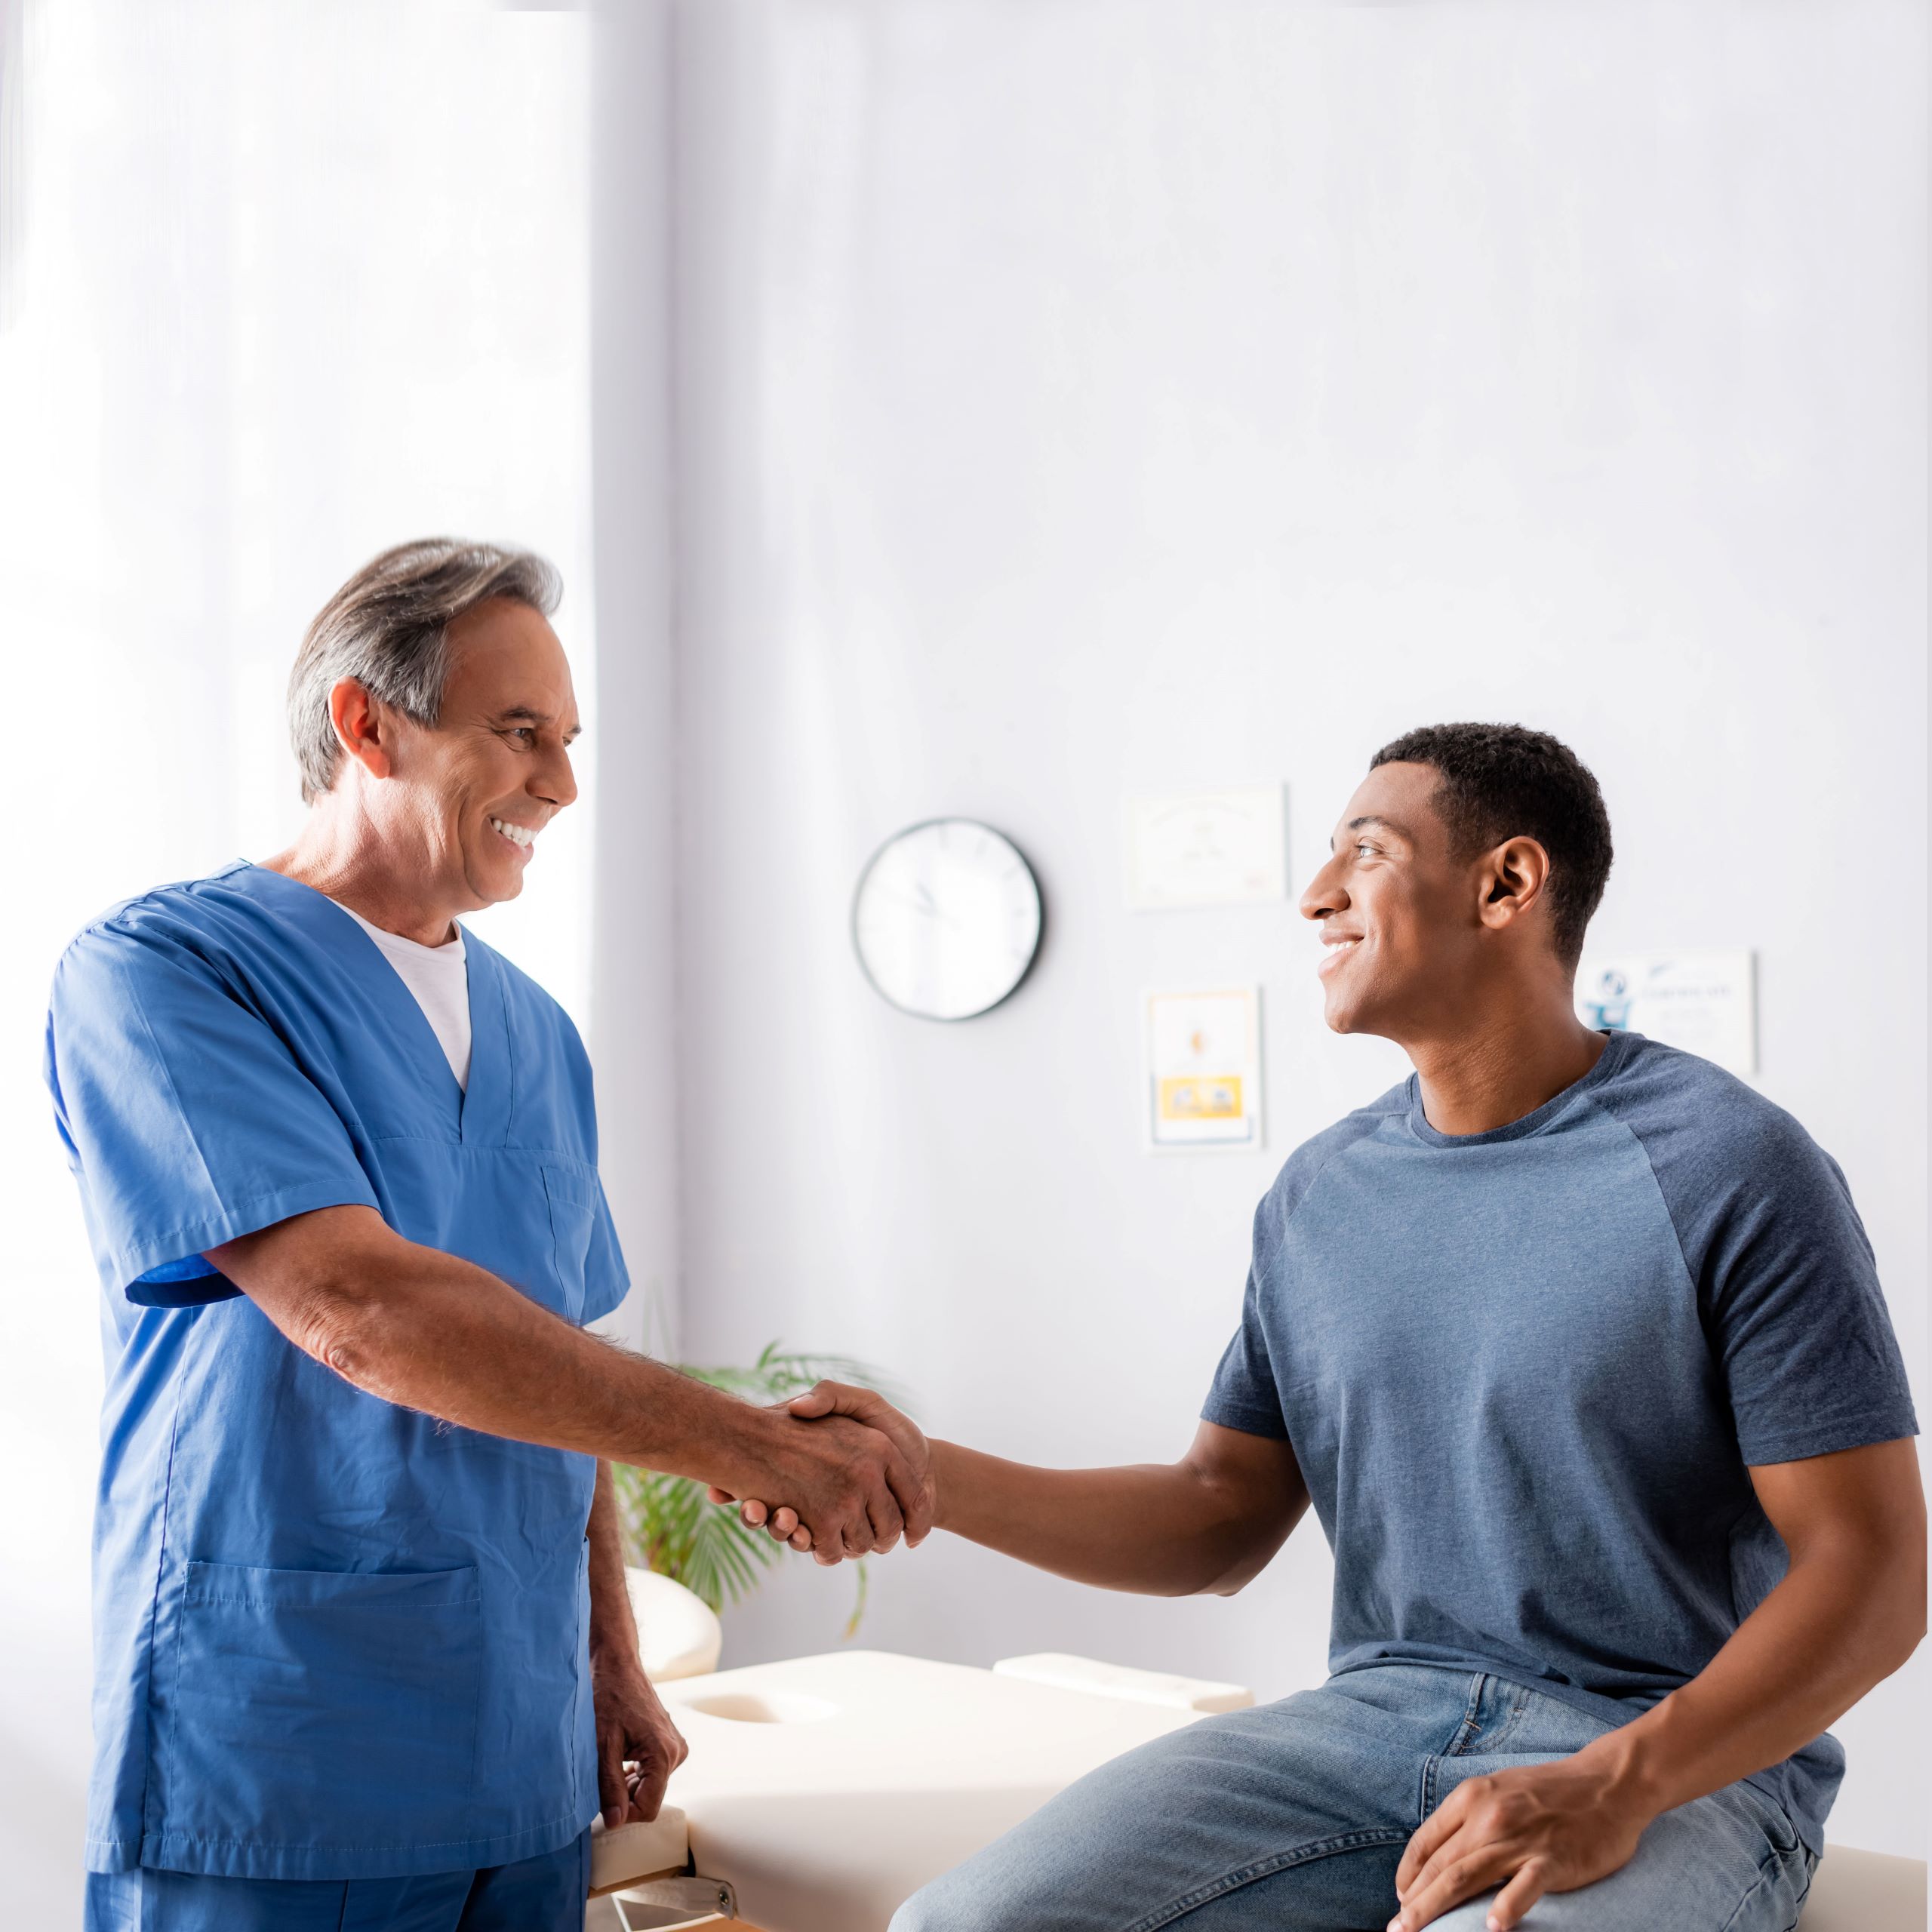 A male provider shaking hands with a male patient.